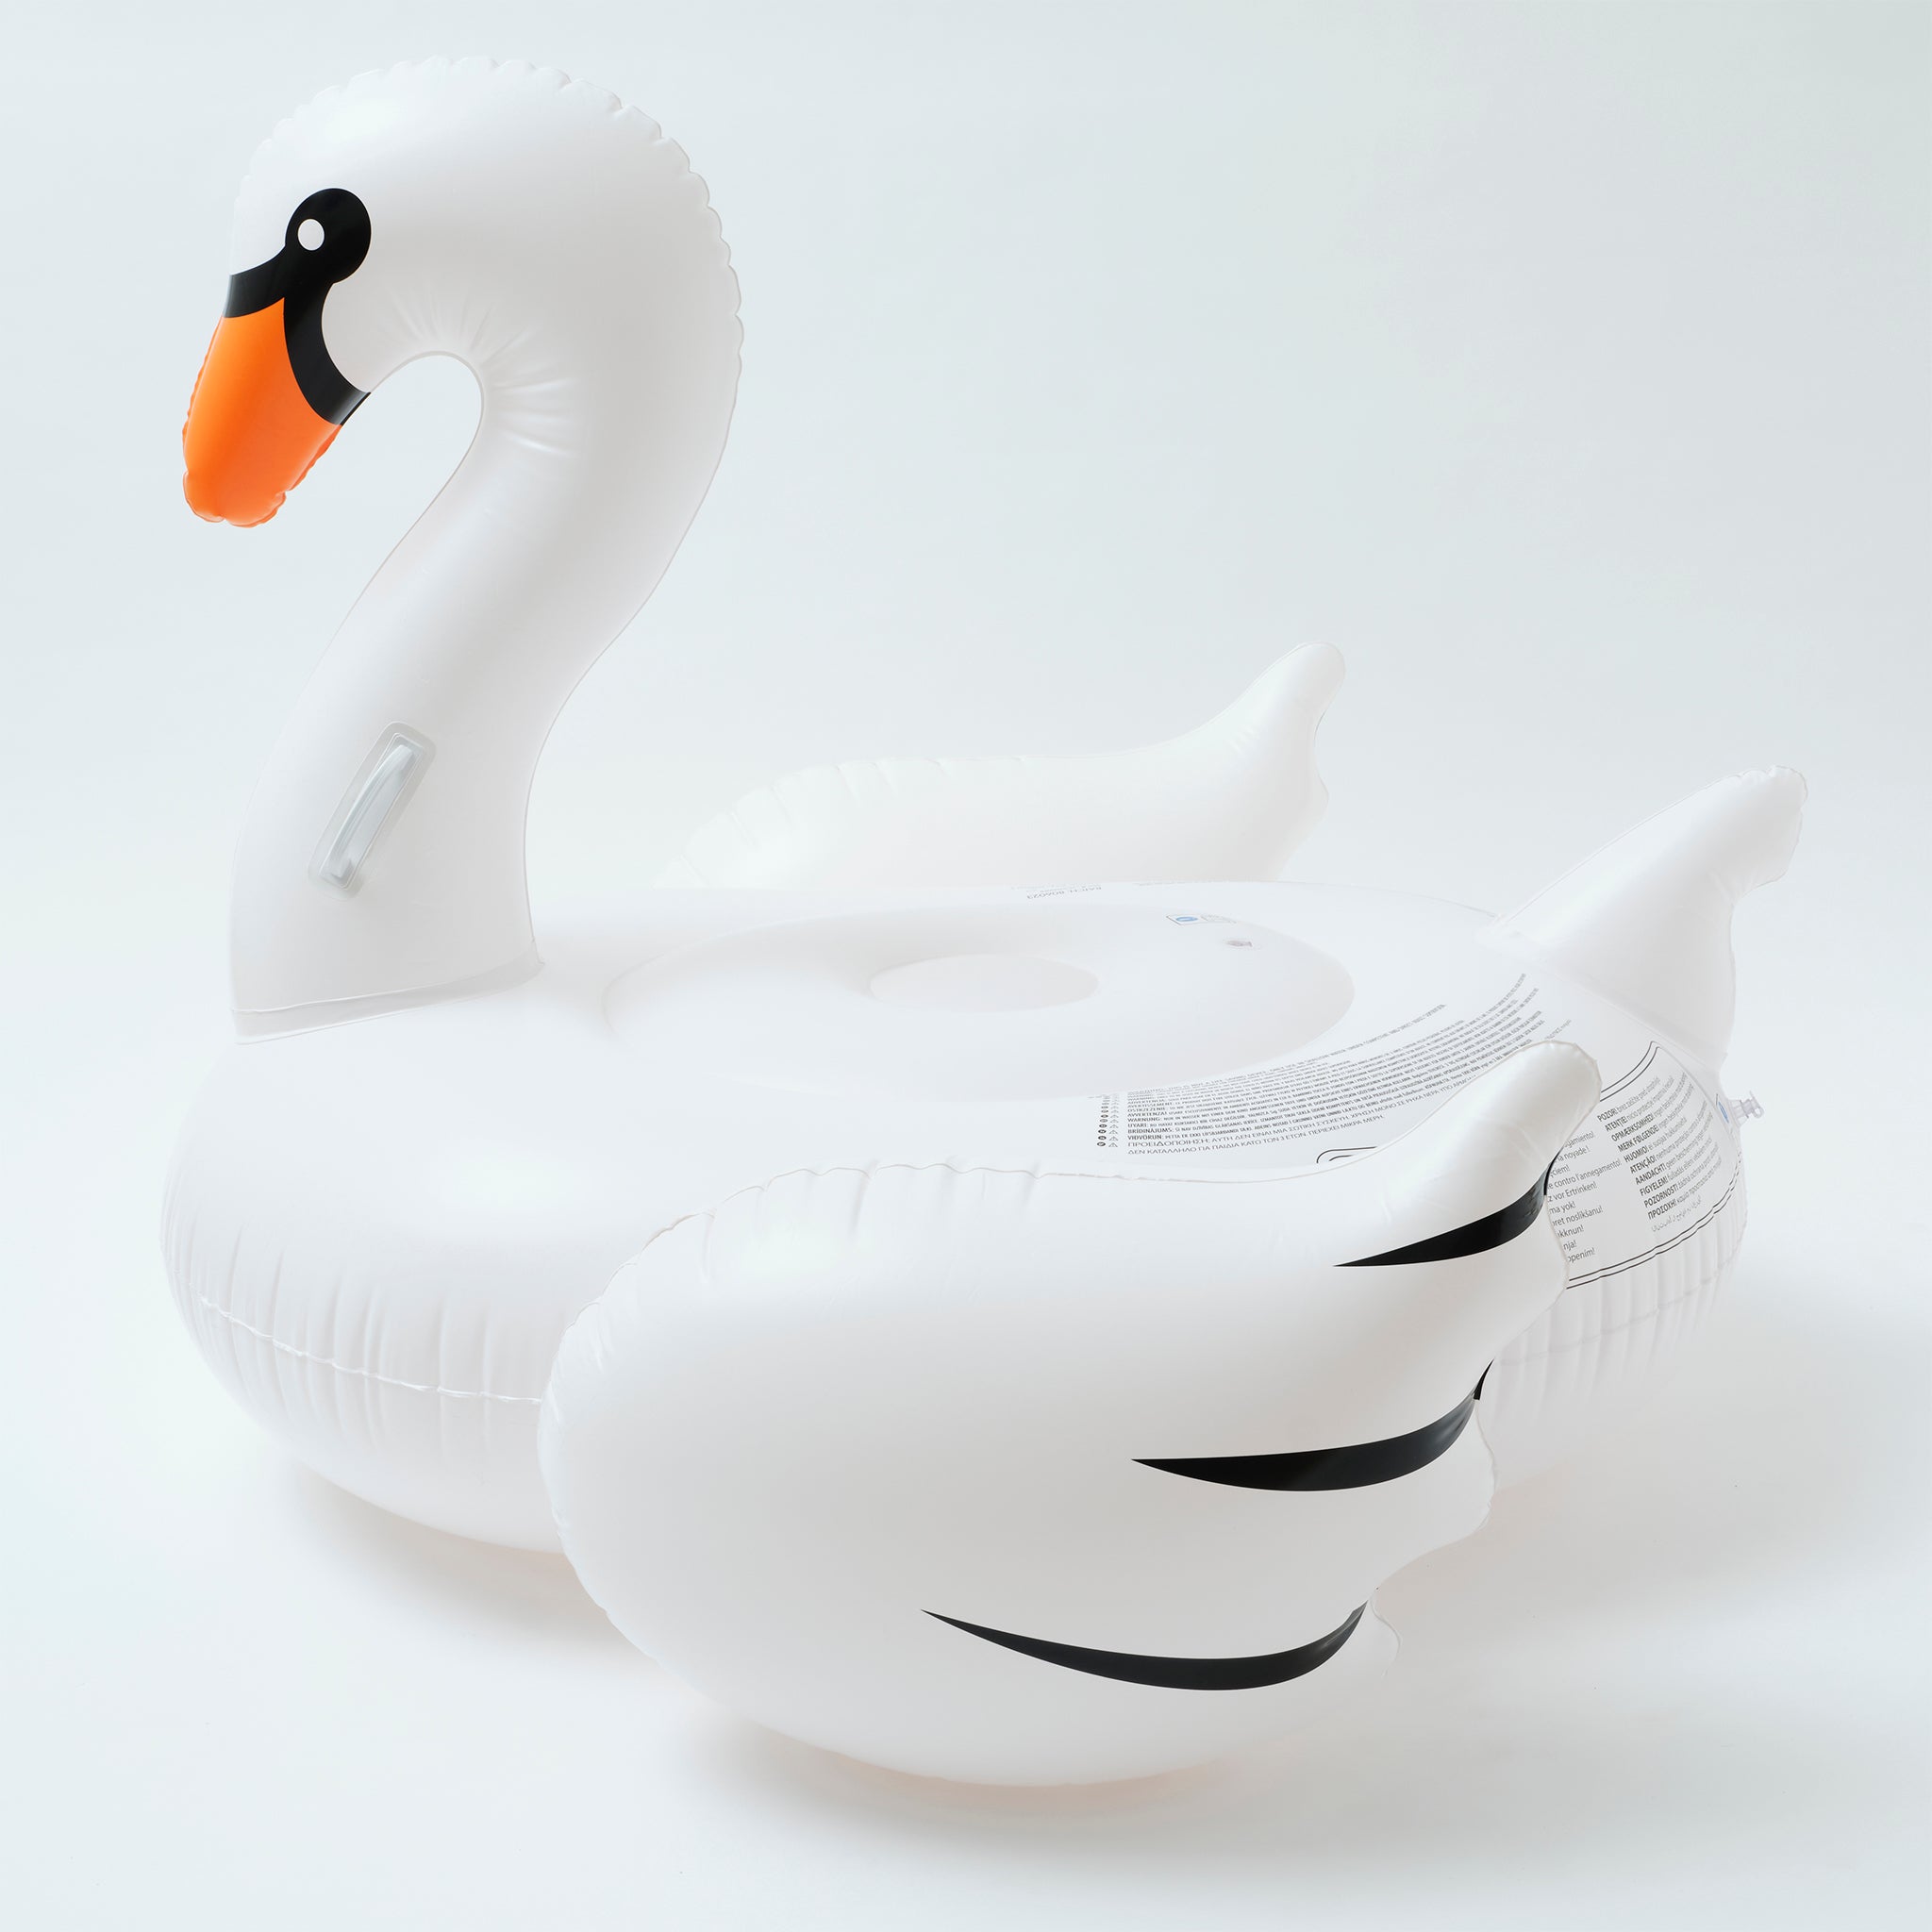 Original Luxe Ride-On Float Swan | The Resort White on White